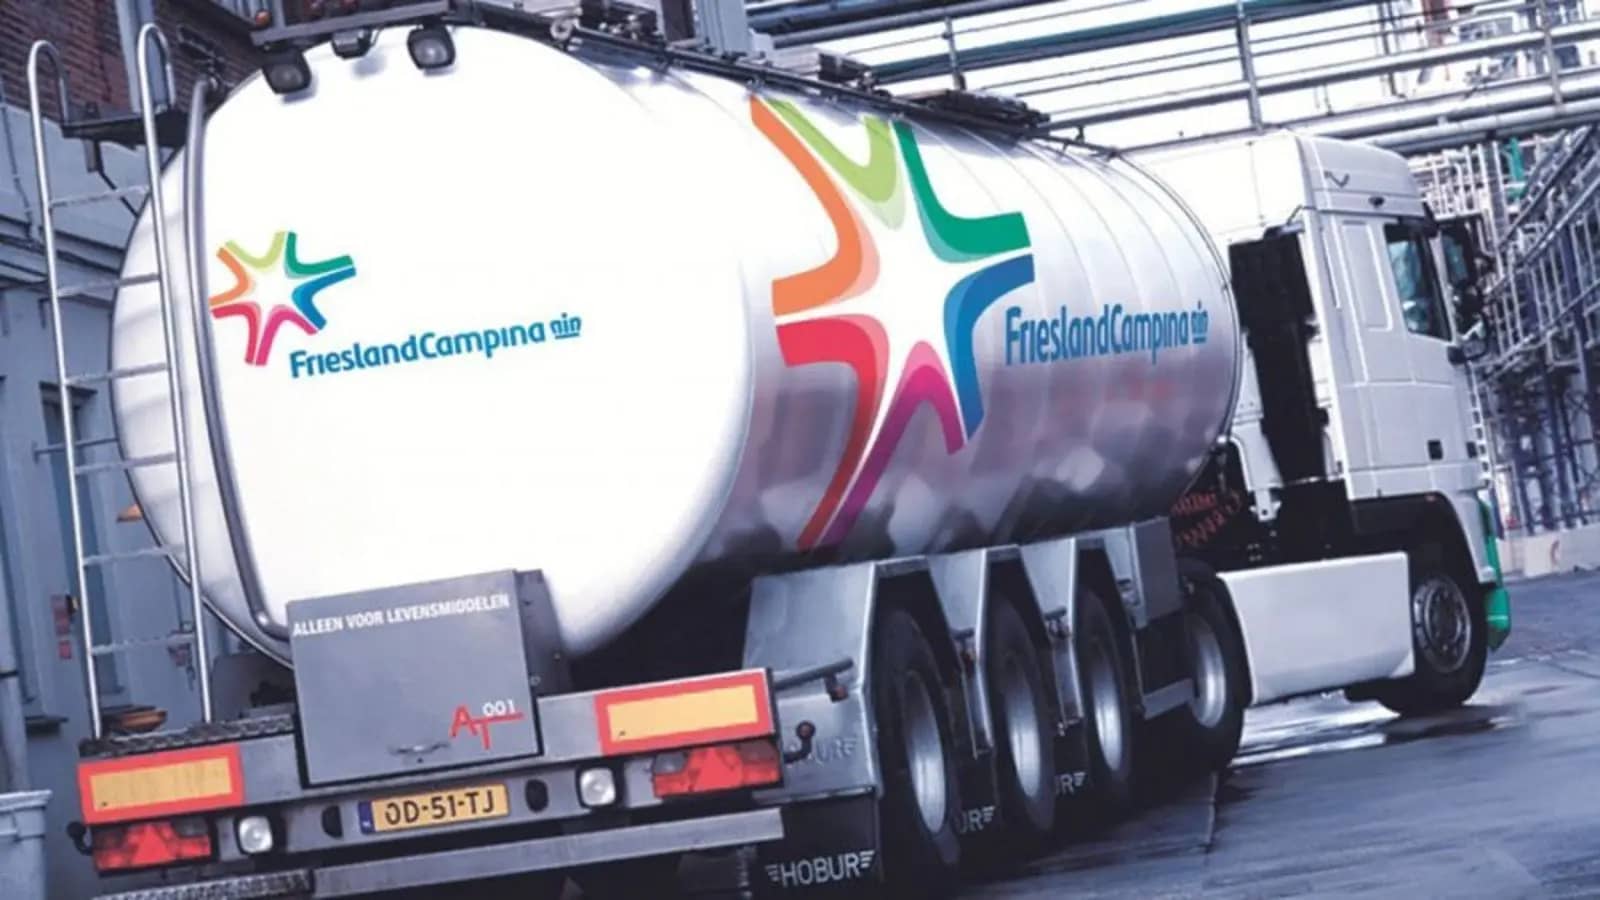 FrieslandCampina to invest US$1.6B in climate-neutral initiatives in push to achieve 2050 net zero goals